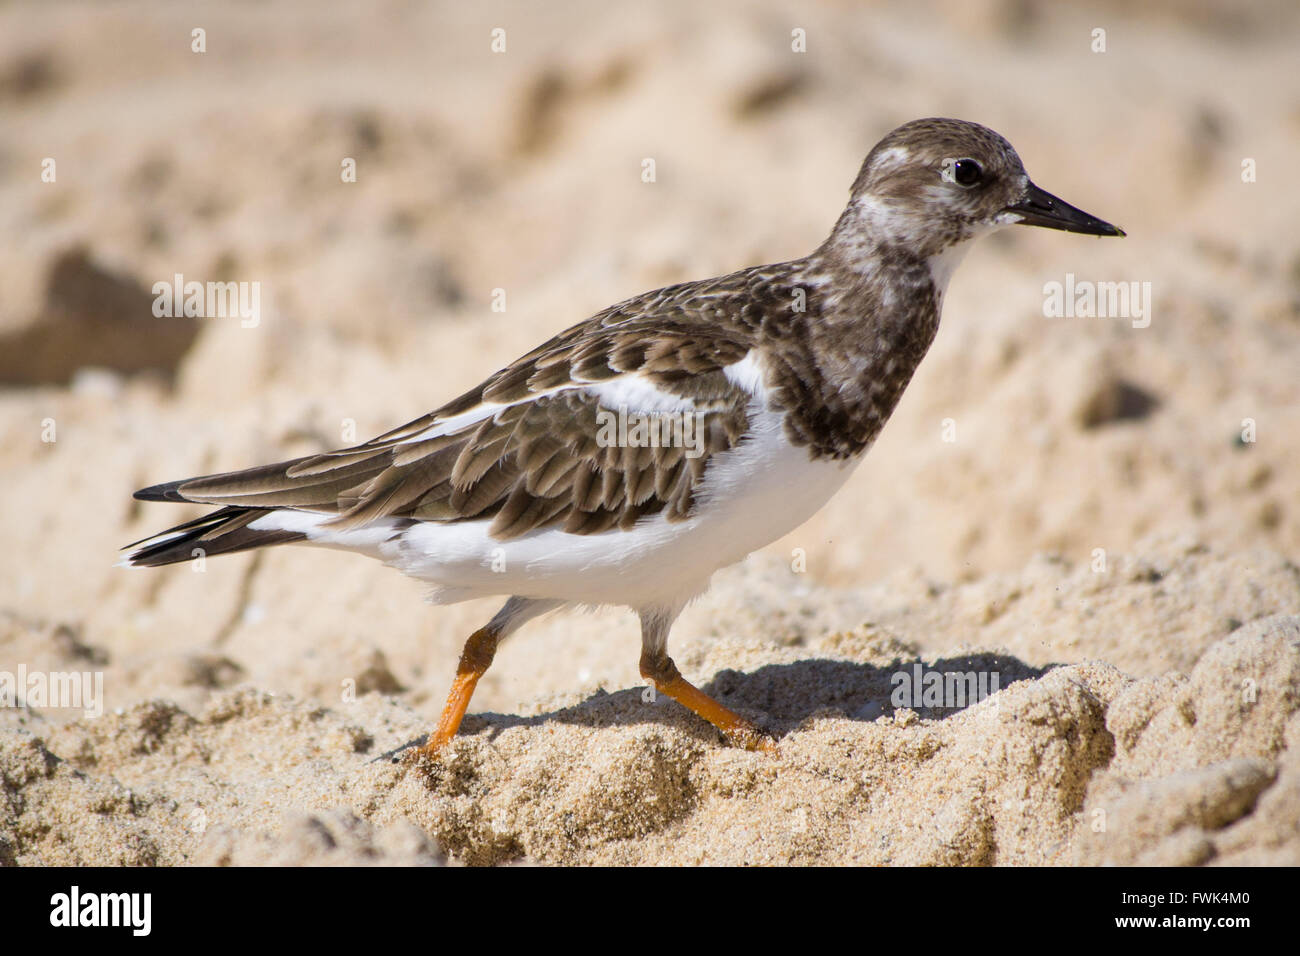 A ruddy turnstone bird (Arenaria interpres) with winter plumage on a sandy beach in the Caribbean. Stock Photo